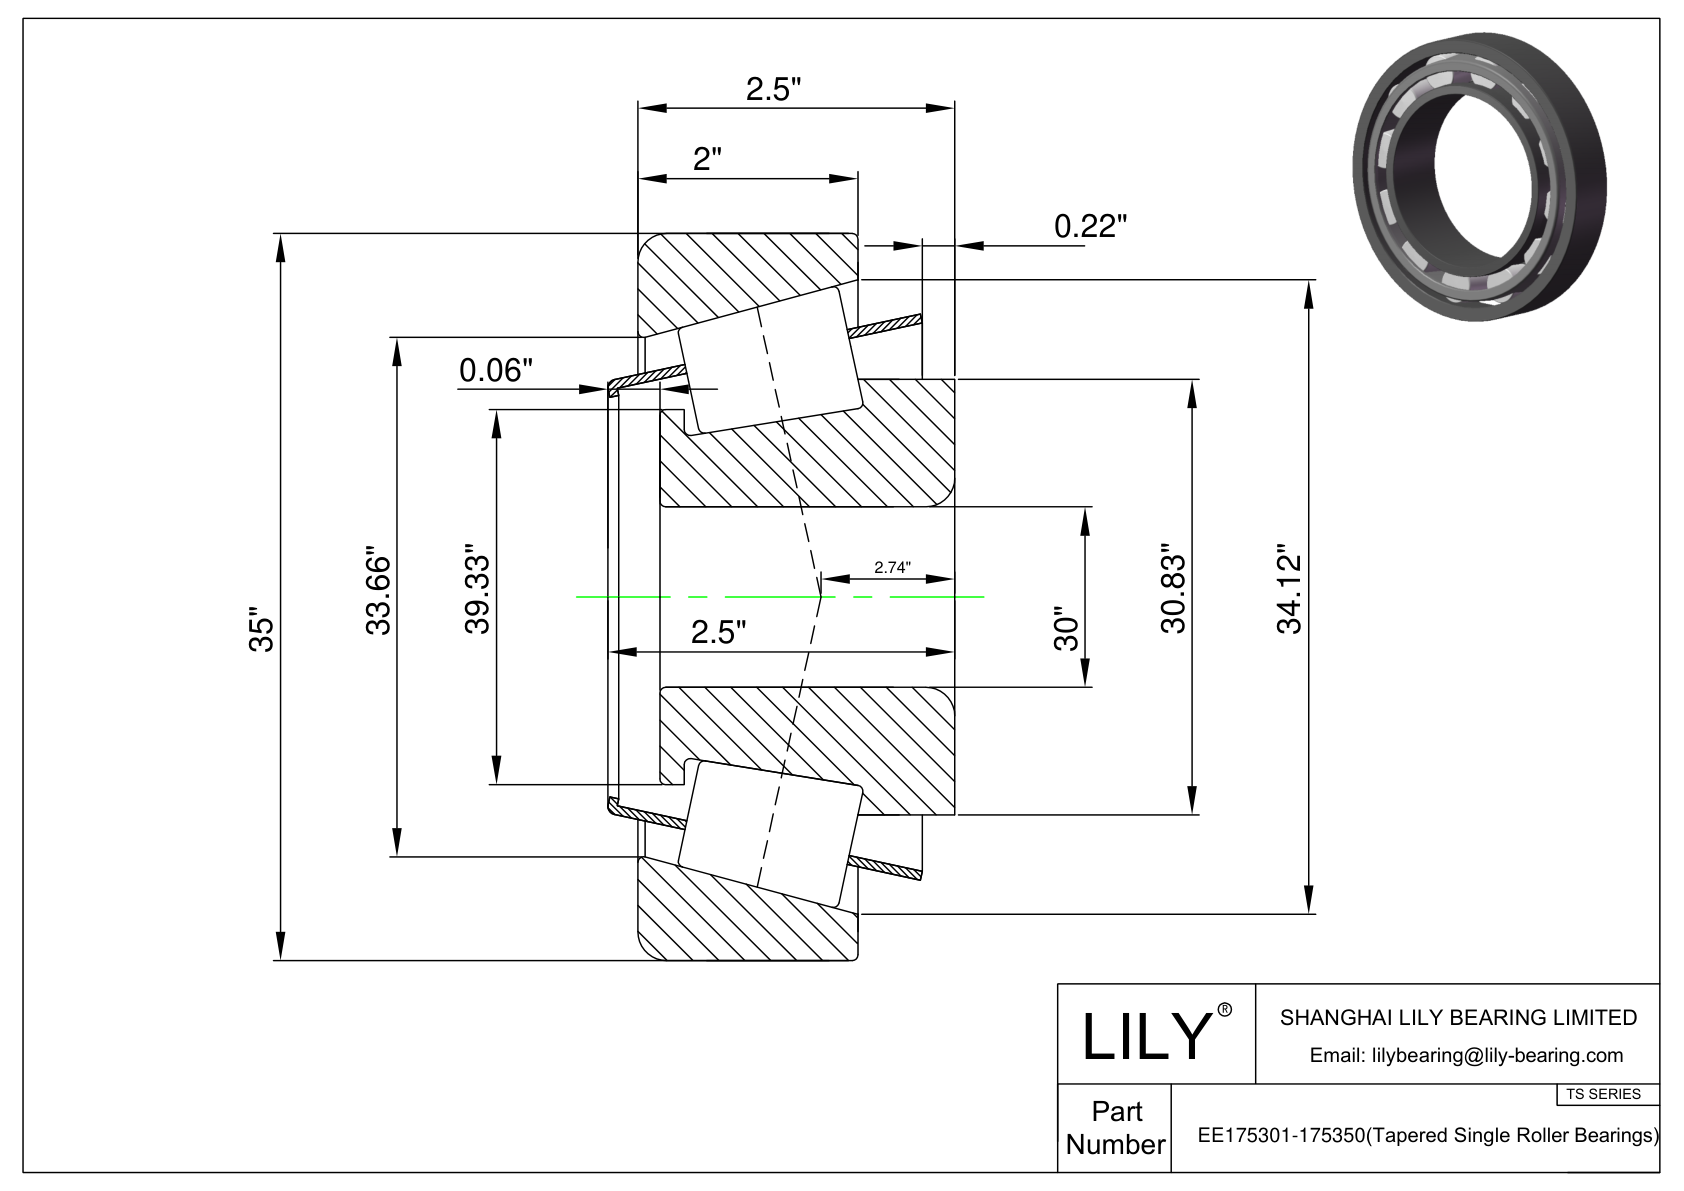 EE175301-175350 TS (Tapered Single Roller Bearings) (Imperial) cad drawing